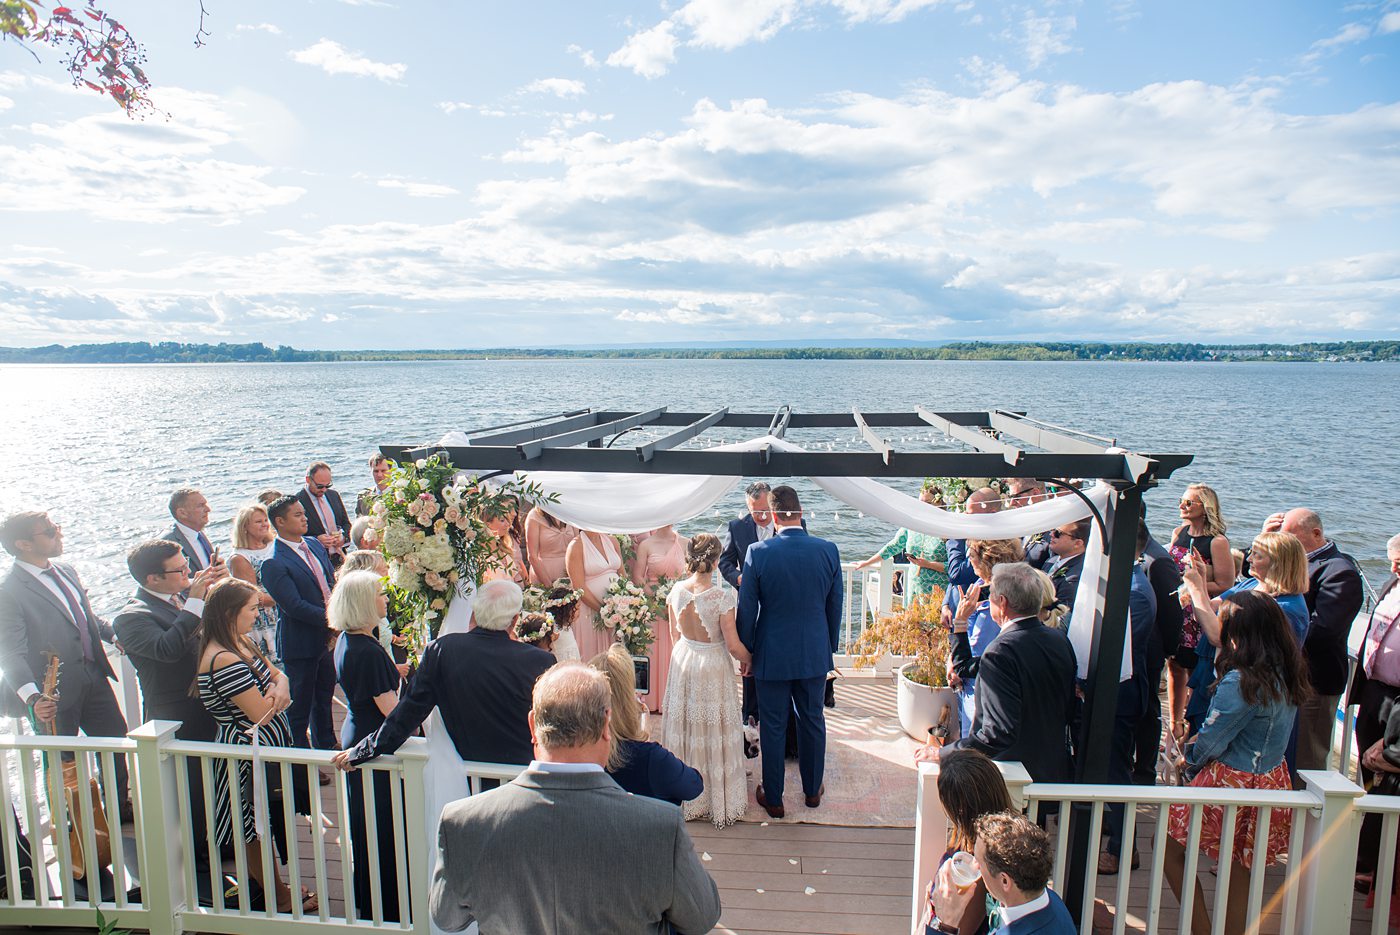 Saratoga Springs destination wedding photos in upstate New York by Mikkel Paige Photography, NY wedding photographer. The bride and groom were married in an intimate wedding at a home with a lakefront ceremony with Native American traditions. They had their dogs by their side as part of the ceremony! #mikkelpaige #saratogaspringswedding #destinationwedding #lakefrontwedding #waterfrontwedding #lakewedding